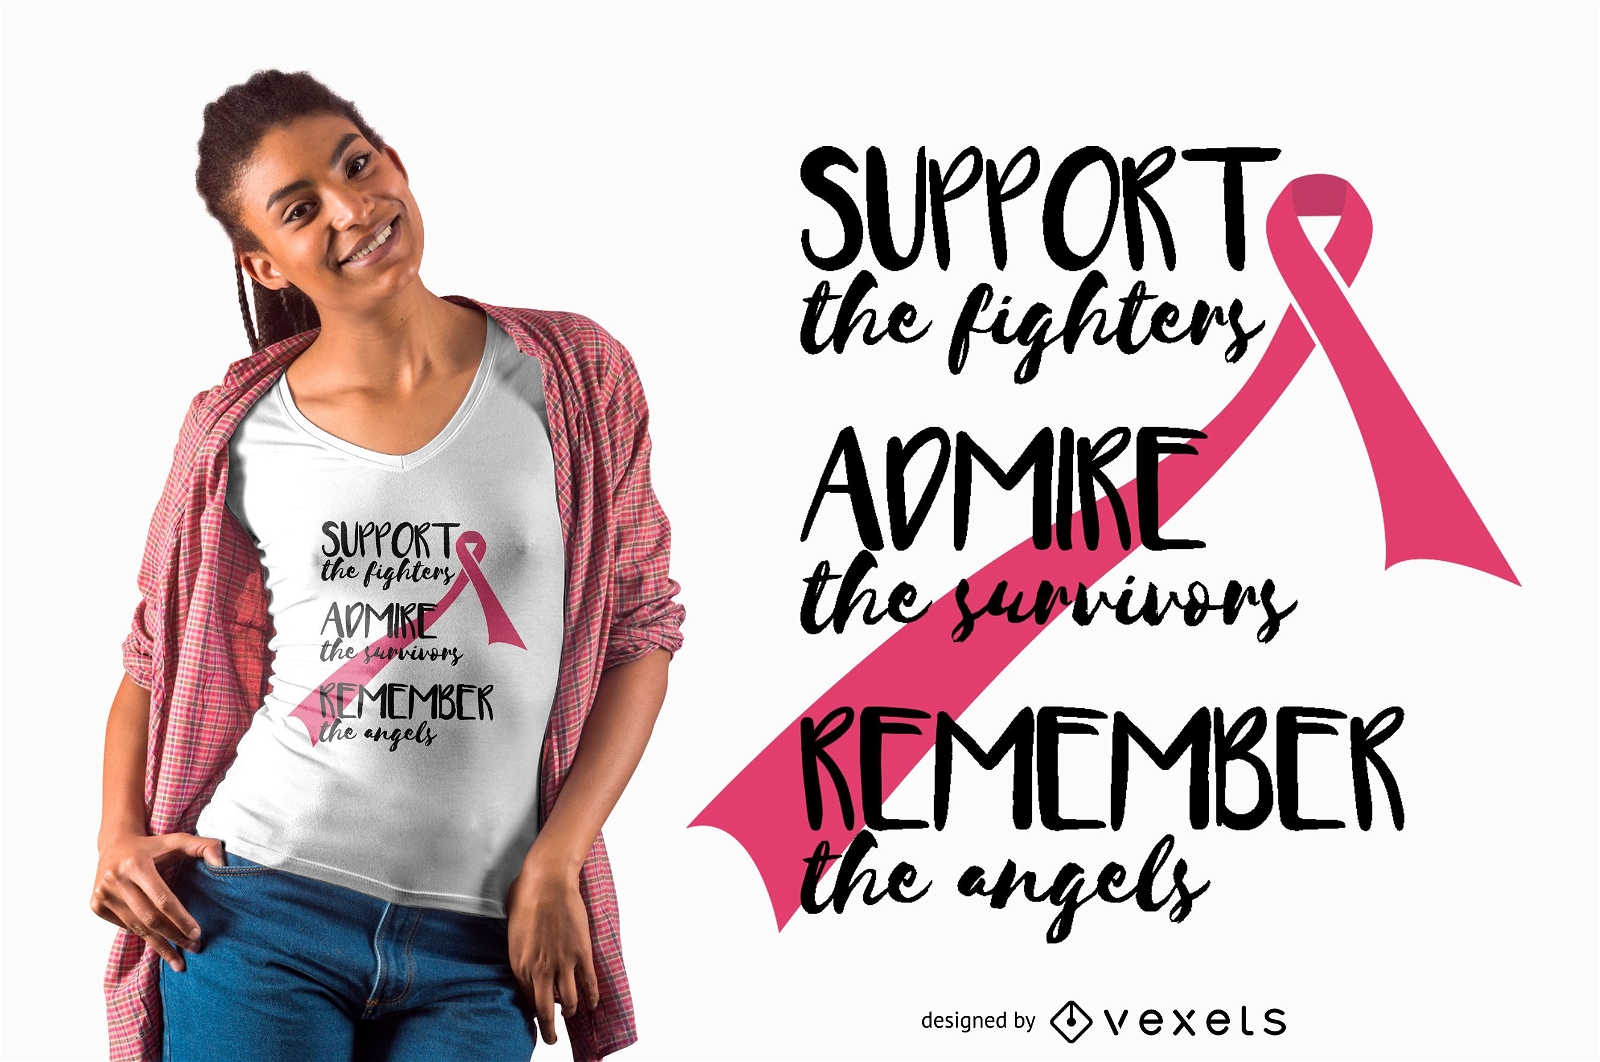 Support the fighters t-shirt design